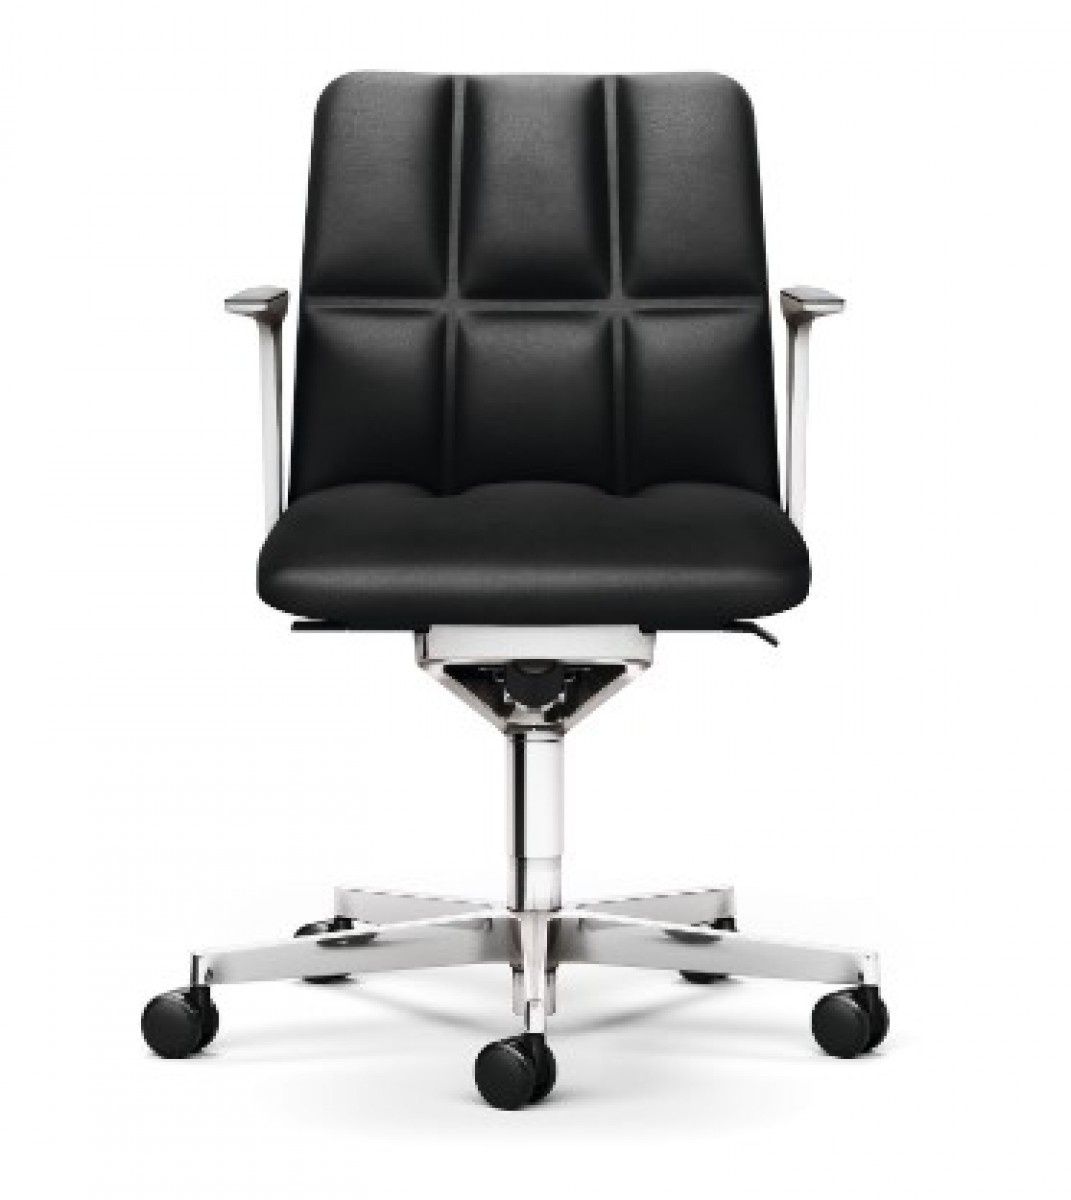 Leadchair Management Swivel Chair, 5-Star Base with Casters, Arm with Leather Pad and Height-Adjustable - Low Back